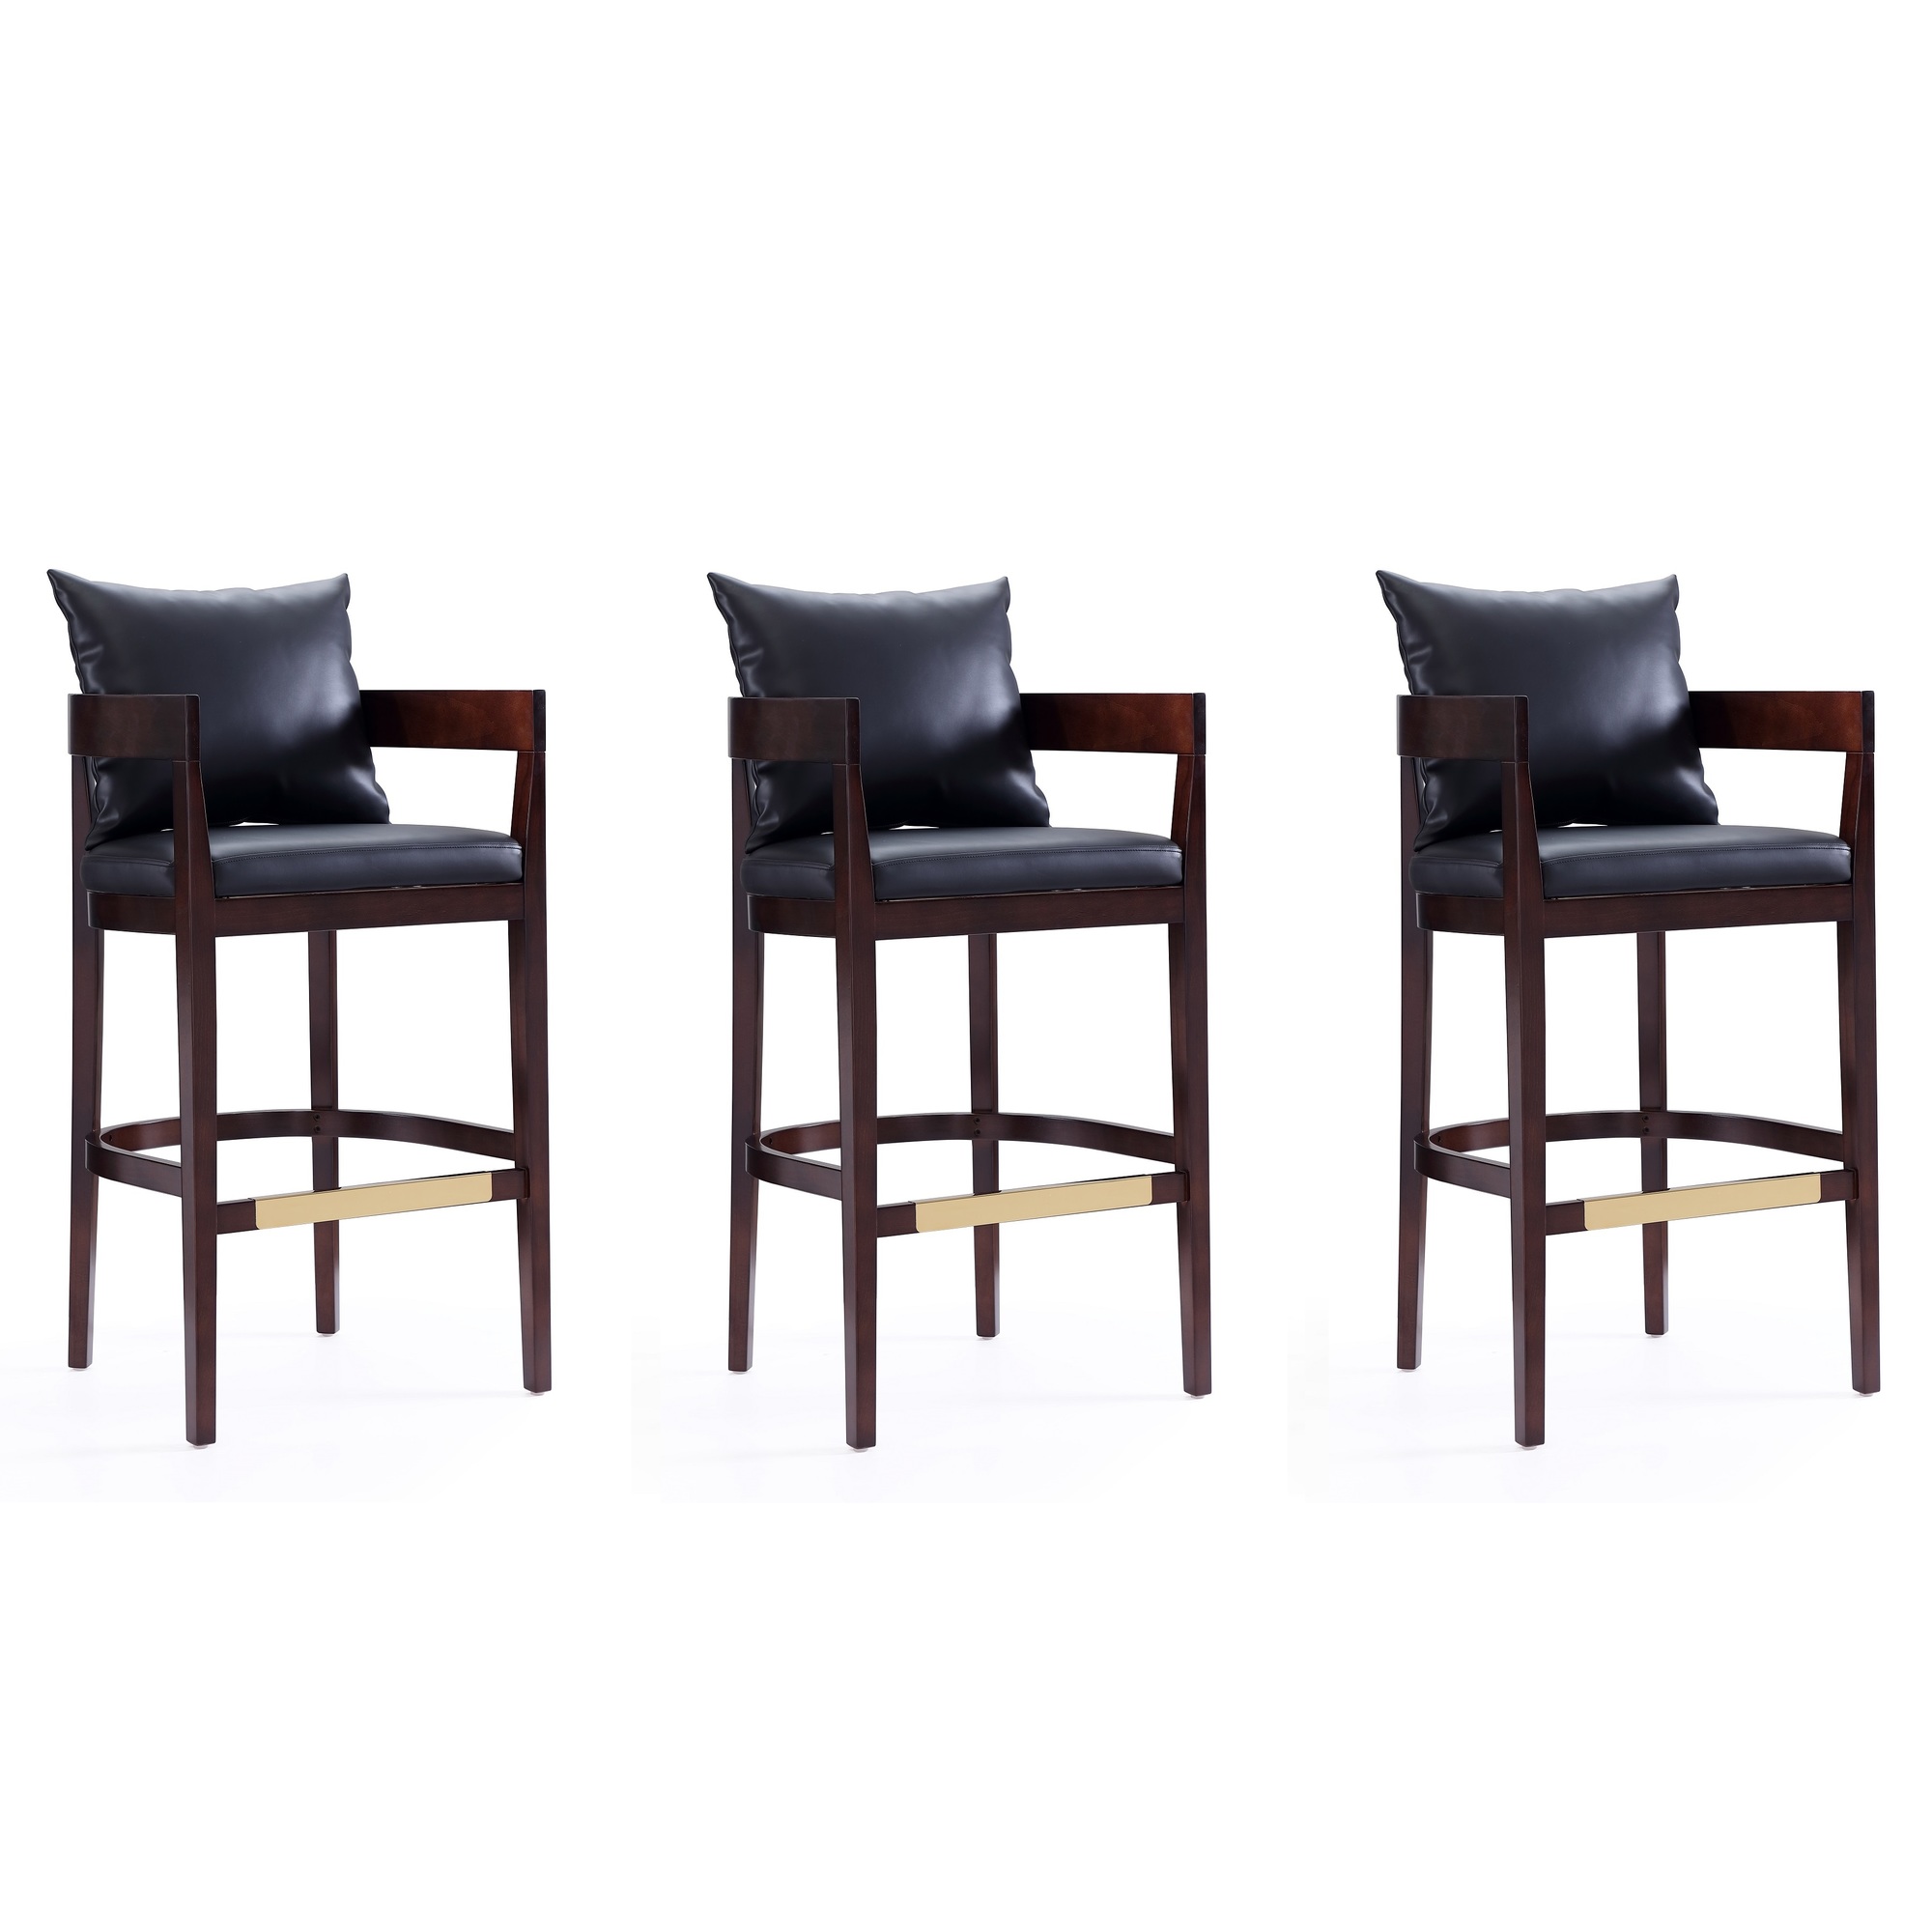 Manhattan Comfort, Ritz 38Inch Black Beech Wood Stool Set of 3 Primary Color Black, Included (qty.) 3 Model 3-BS013